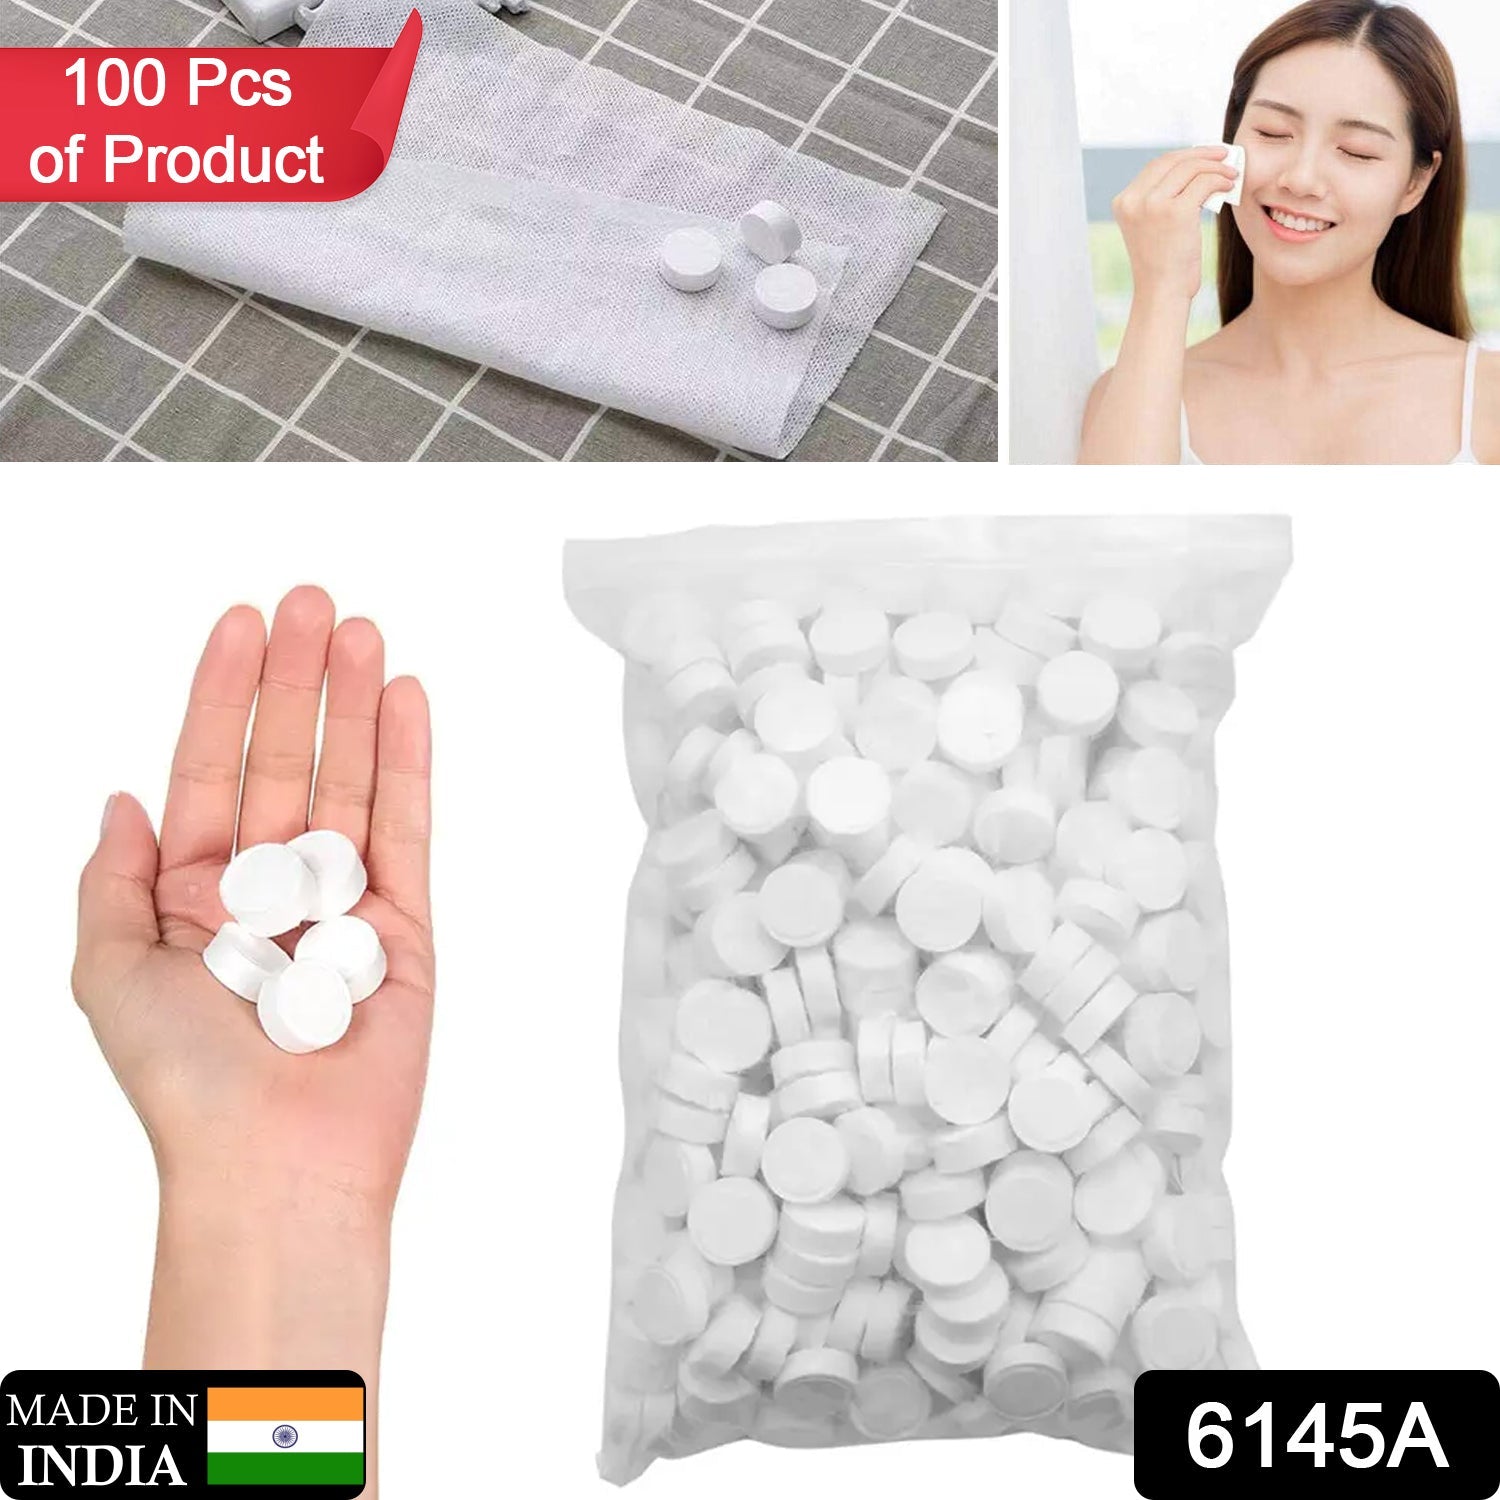 6145A Compressed Facial Face Sheet tablets Outdoor Travel Portable Face Towel Disposable Magic Towel Tablet Capsules ( 100 pc ) DeoDap